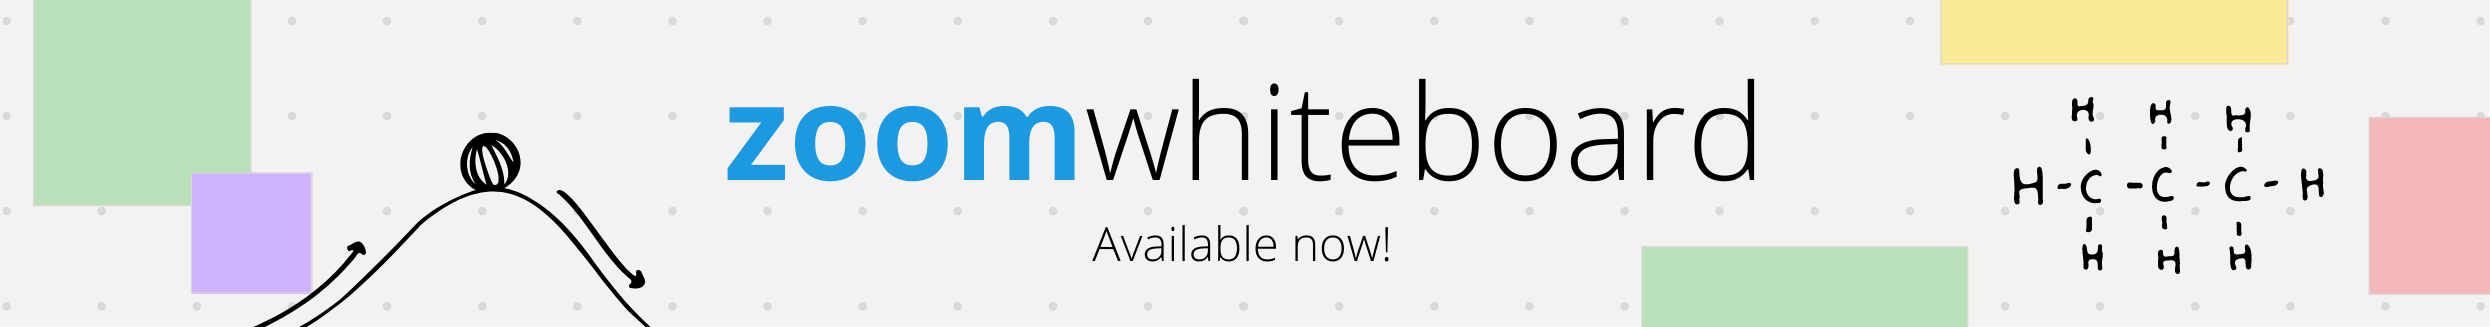 Zoom Whiteboard now available! 